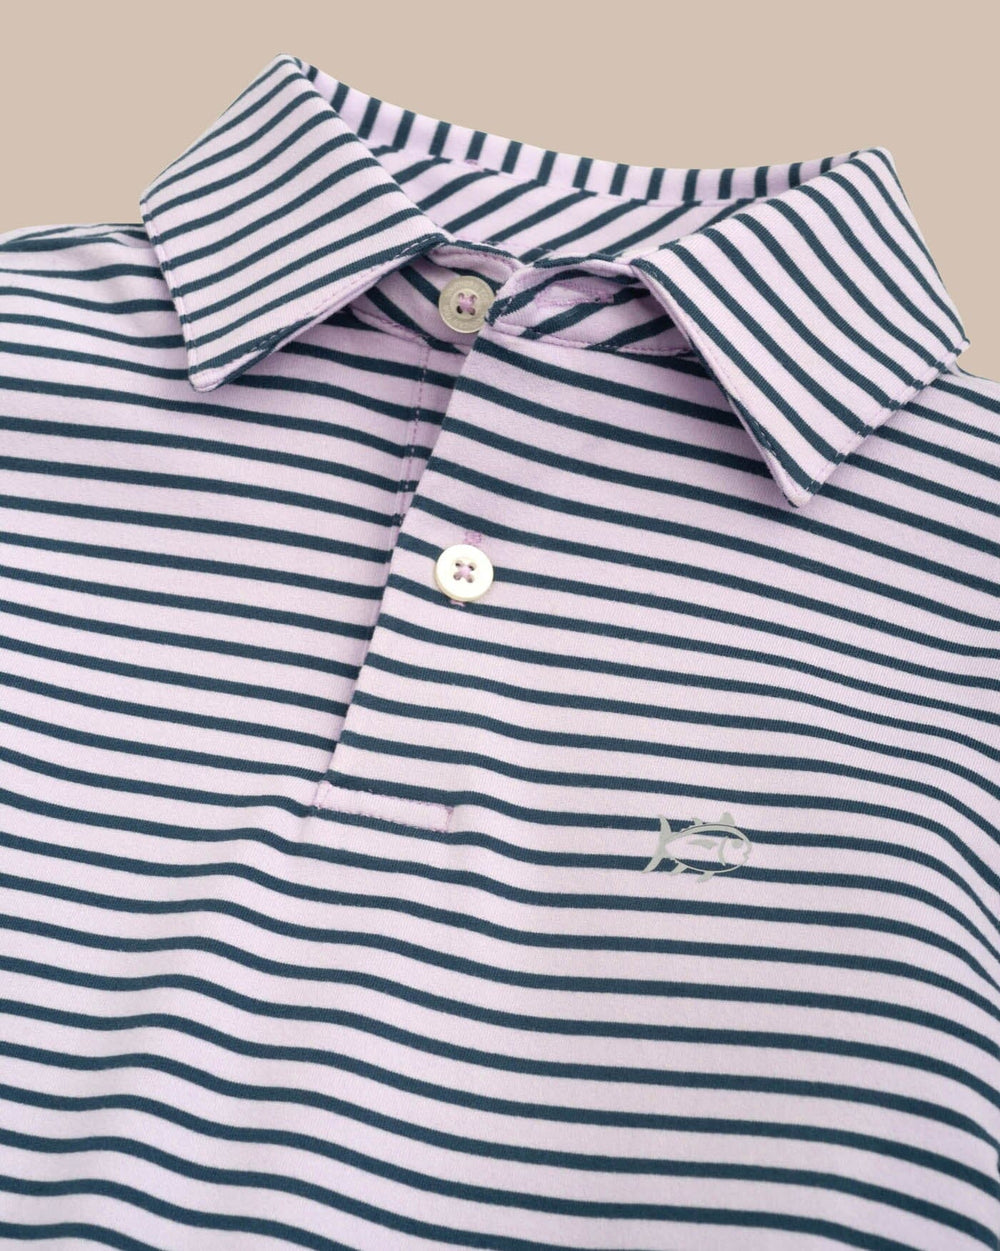 The detail view of the Southern Tide Boys Ryder Heather Marin Stripe Performance Polo Shirt by Southern Tide - Heather Orchid Petal